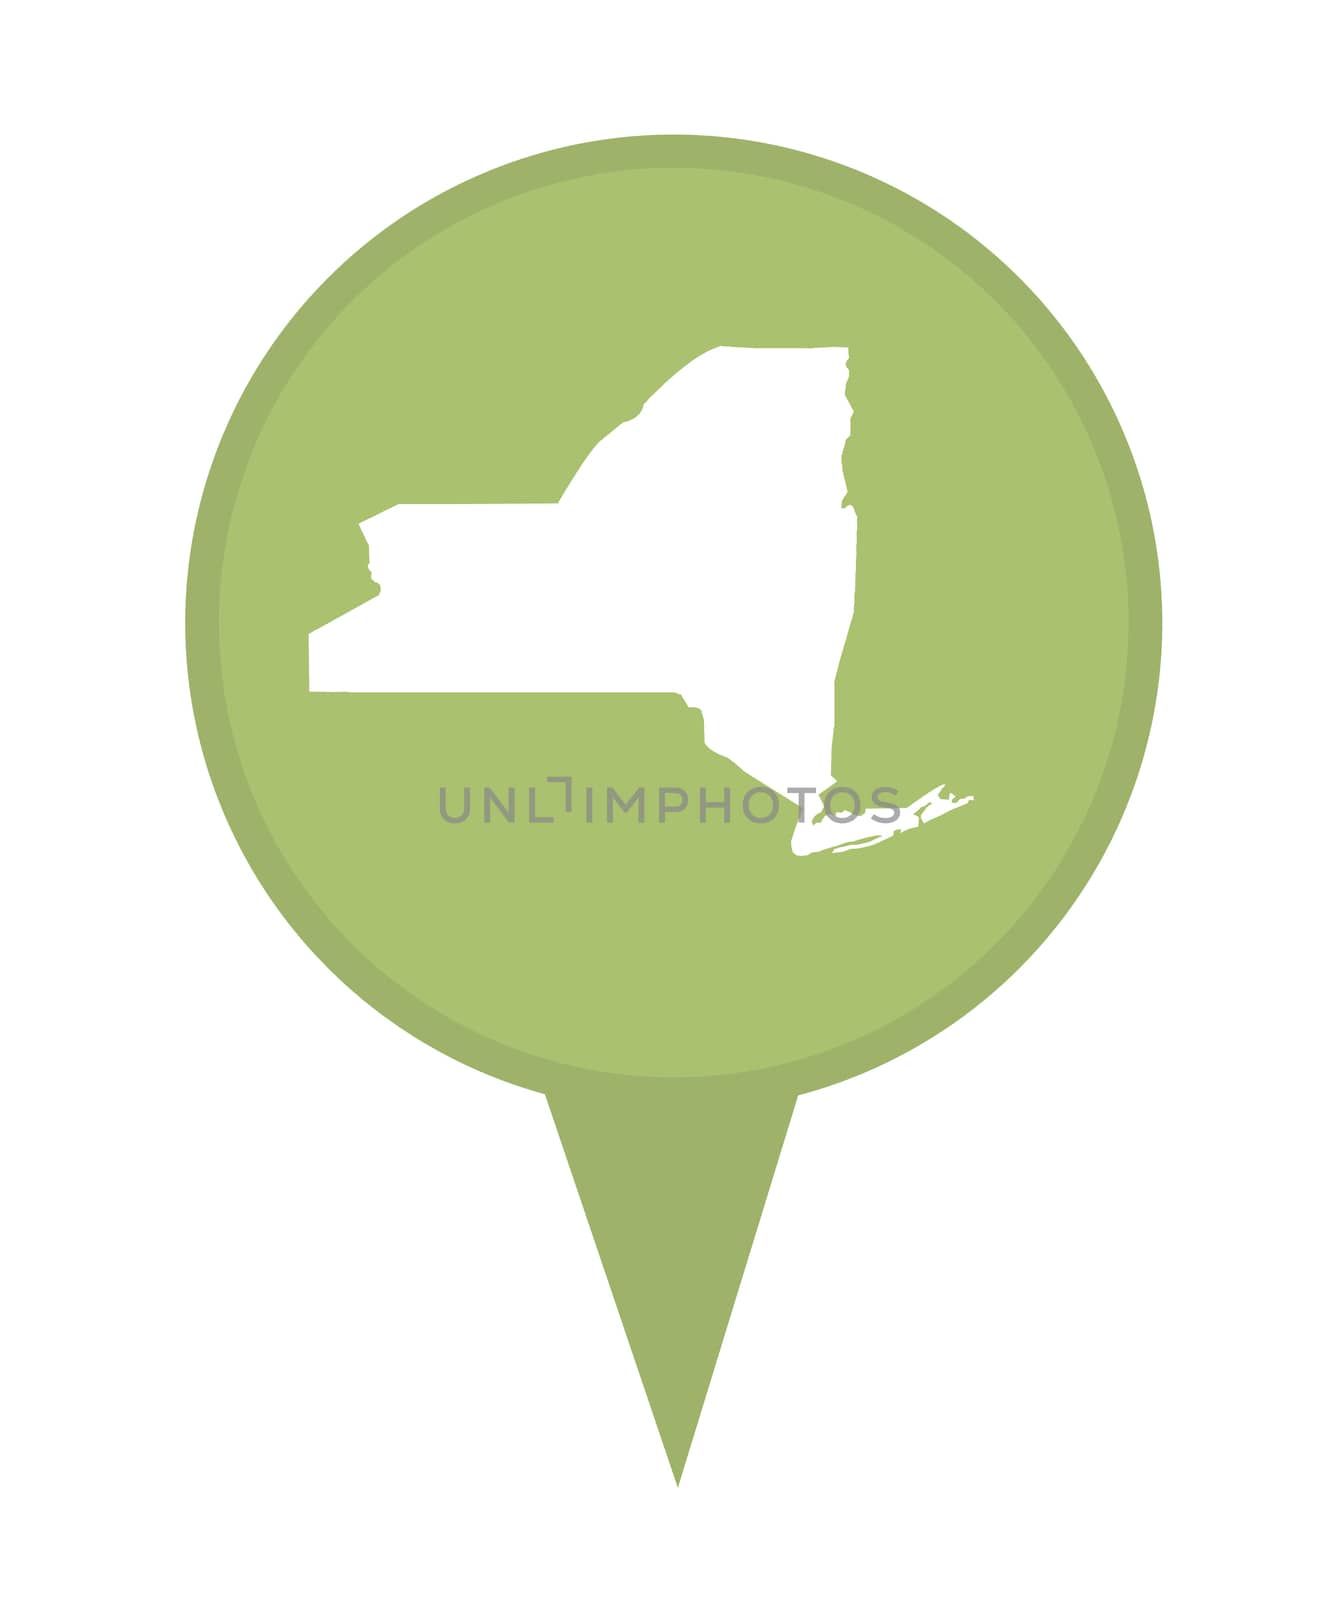 American state of New York marker pin isolated on a white background.